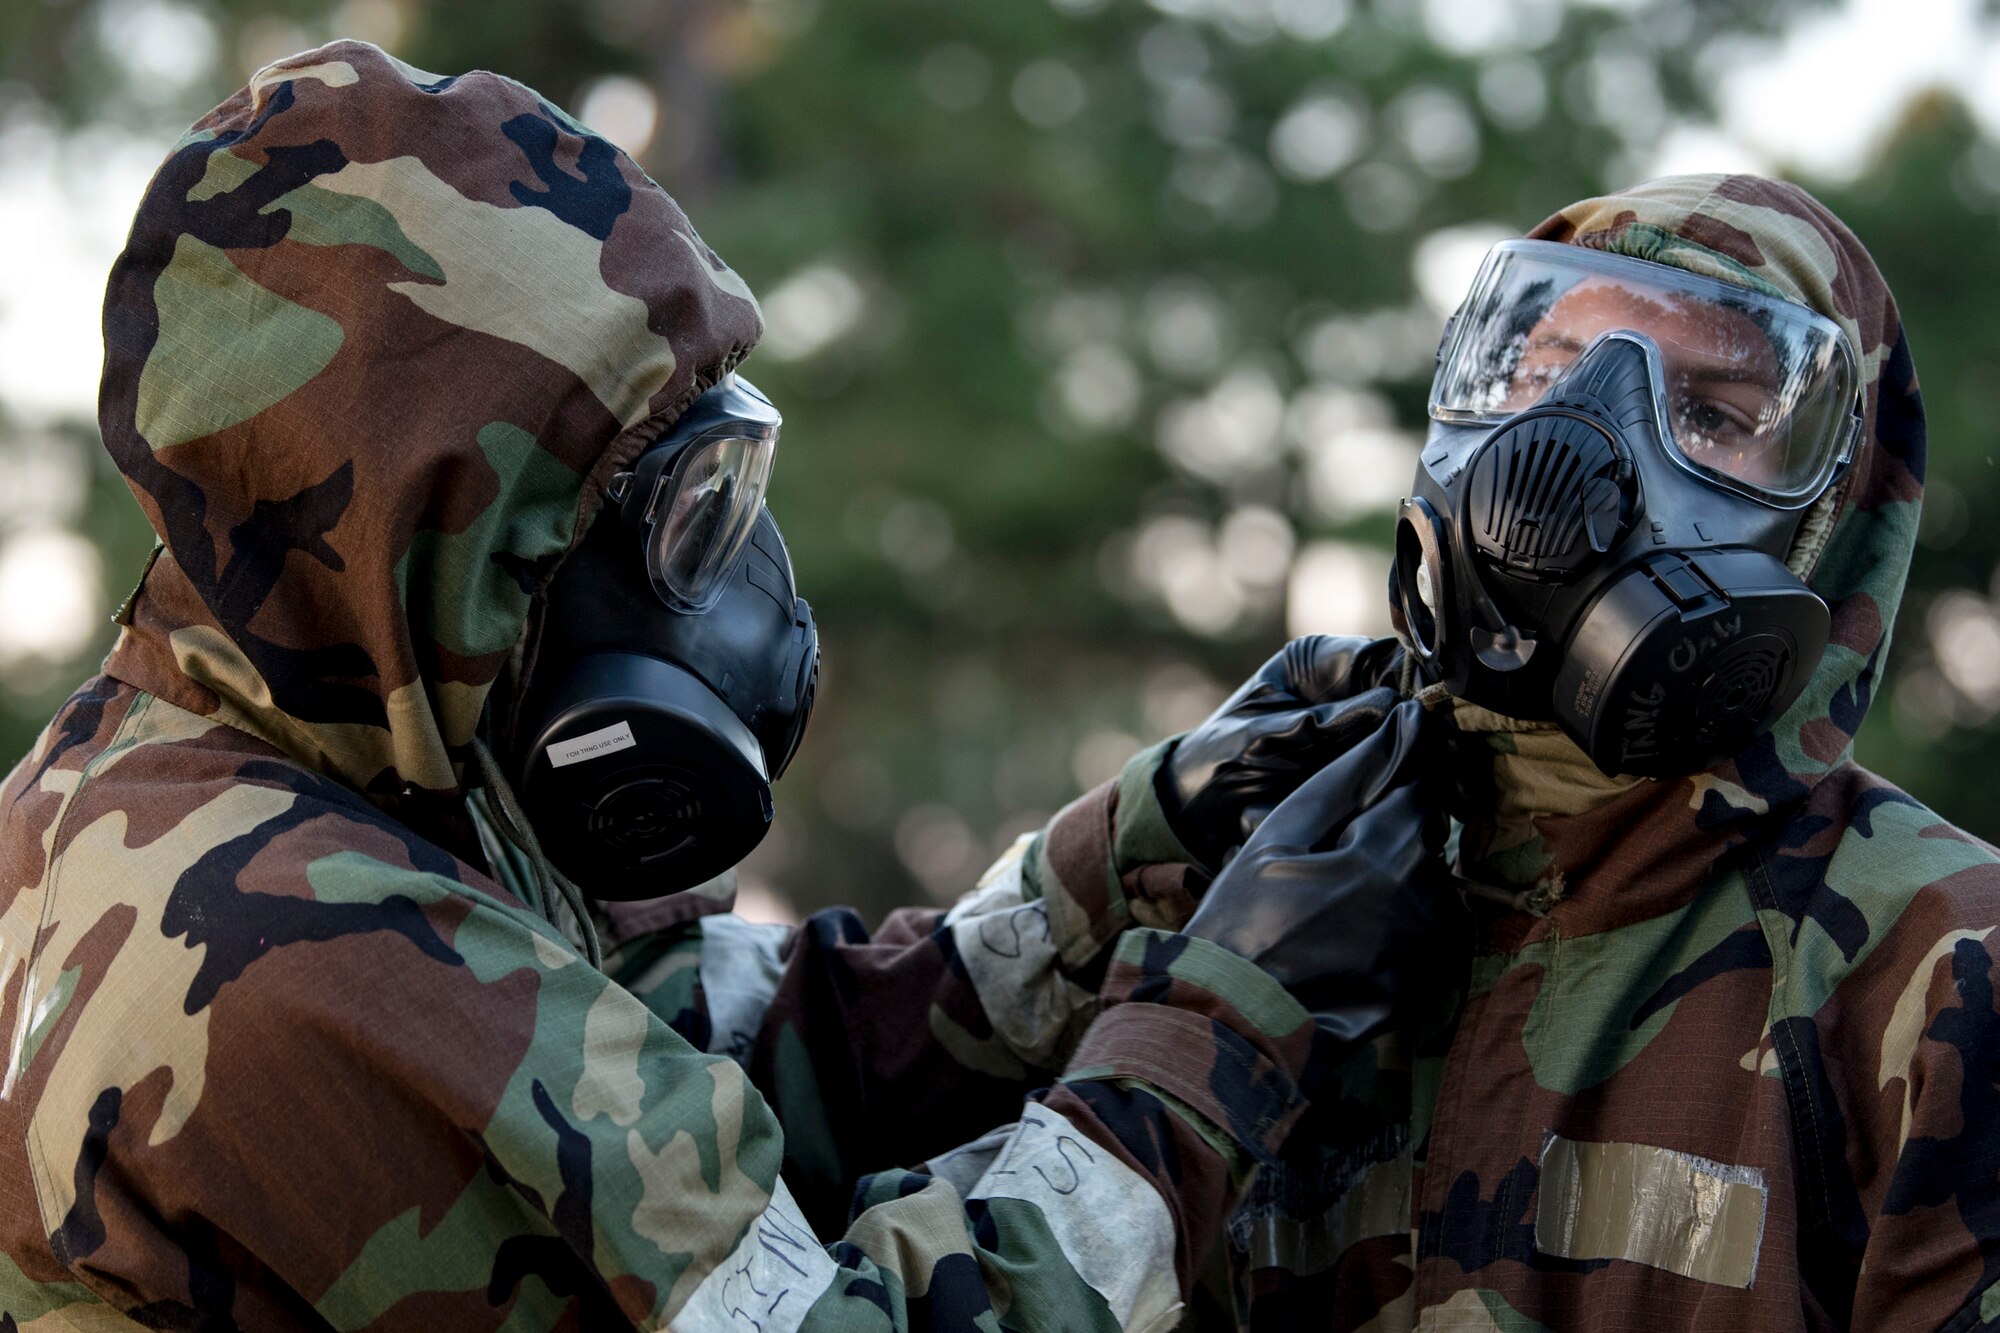 Airmen from the 23d Civil Engineer Squadron perform buddy checks during the Ability to Survive and Operate (ATSO) Rodeo, Sept. 20, 2018, at Moody Air Force Base, Ga. Approximately 2,000 Airmen executed self-aid and buddy care, security and chemical attack avoidance missions under duress in a simulated chemical warfare environment. Testing and enhancing their operational readiness, this prepared the 23d Wing for the upcoming Phase II exercise during Nov. 5-8, 2018, which will be conducted for the first time in seven years. (U.S. Air Force photo by Airman Taryn Butler)